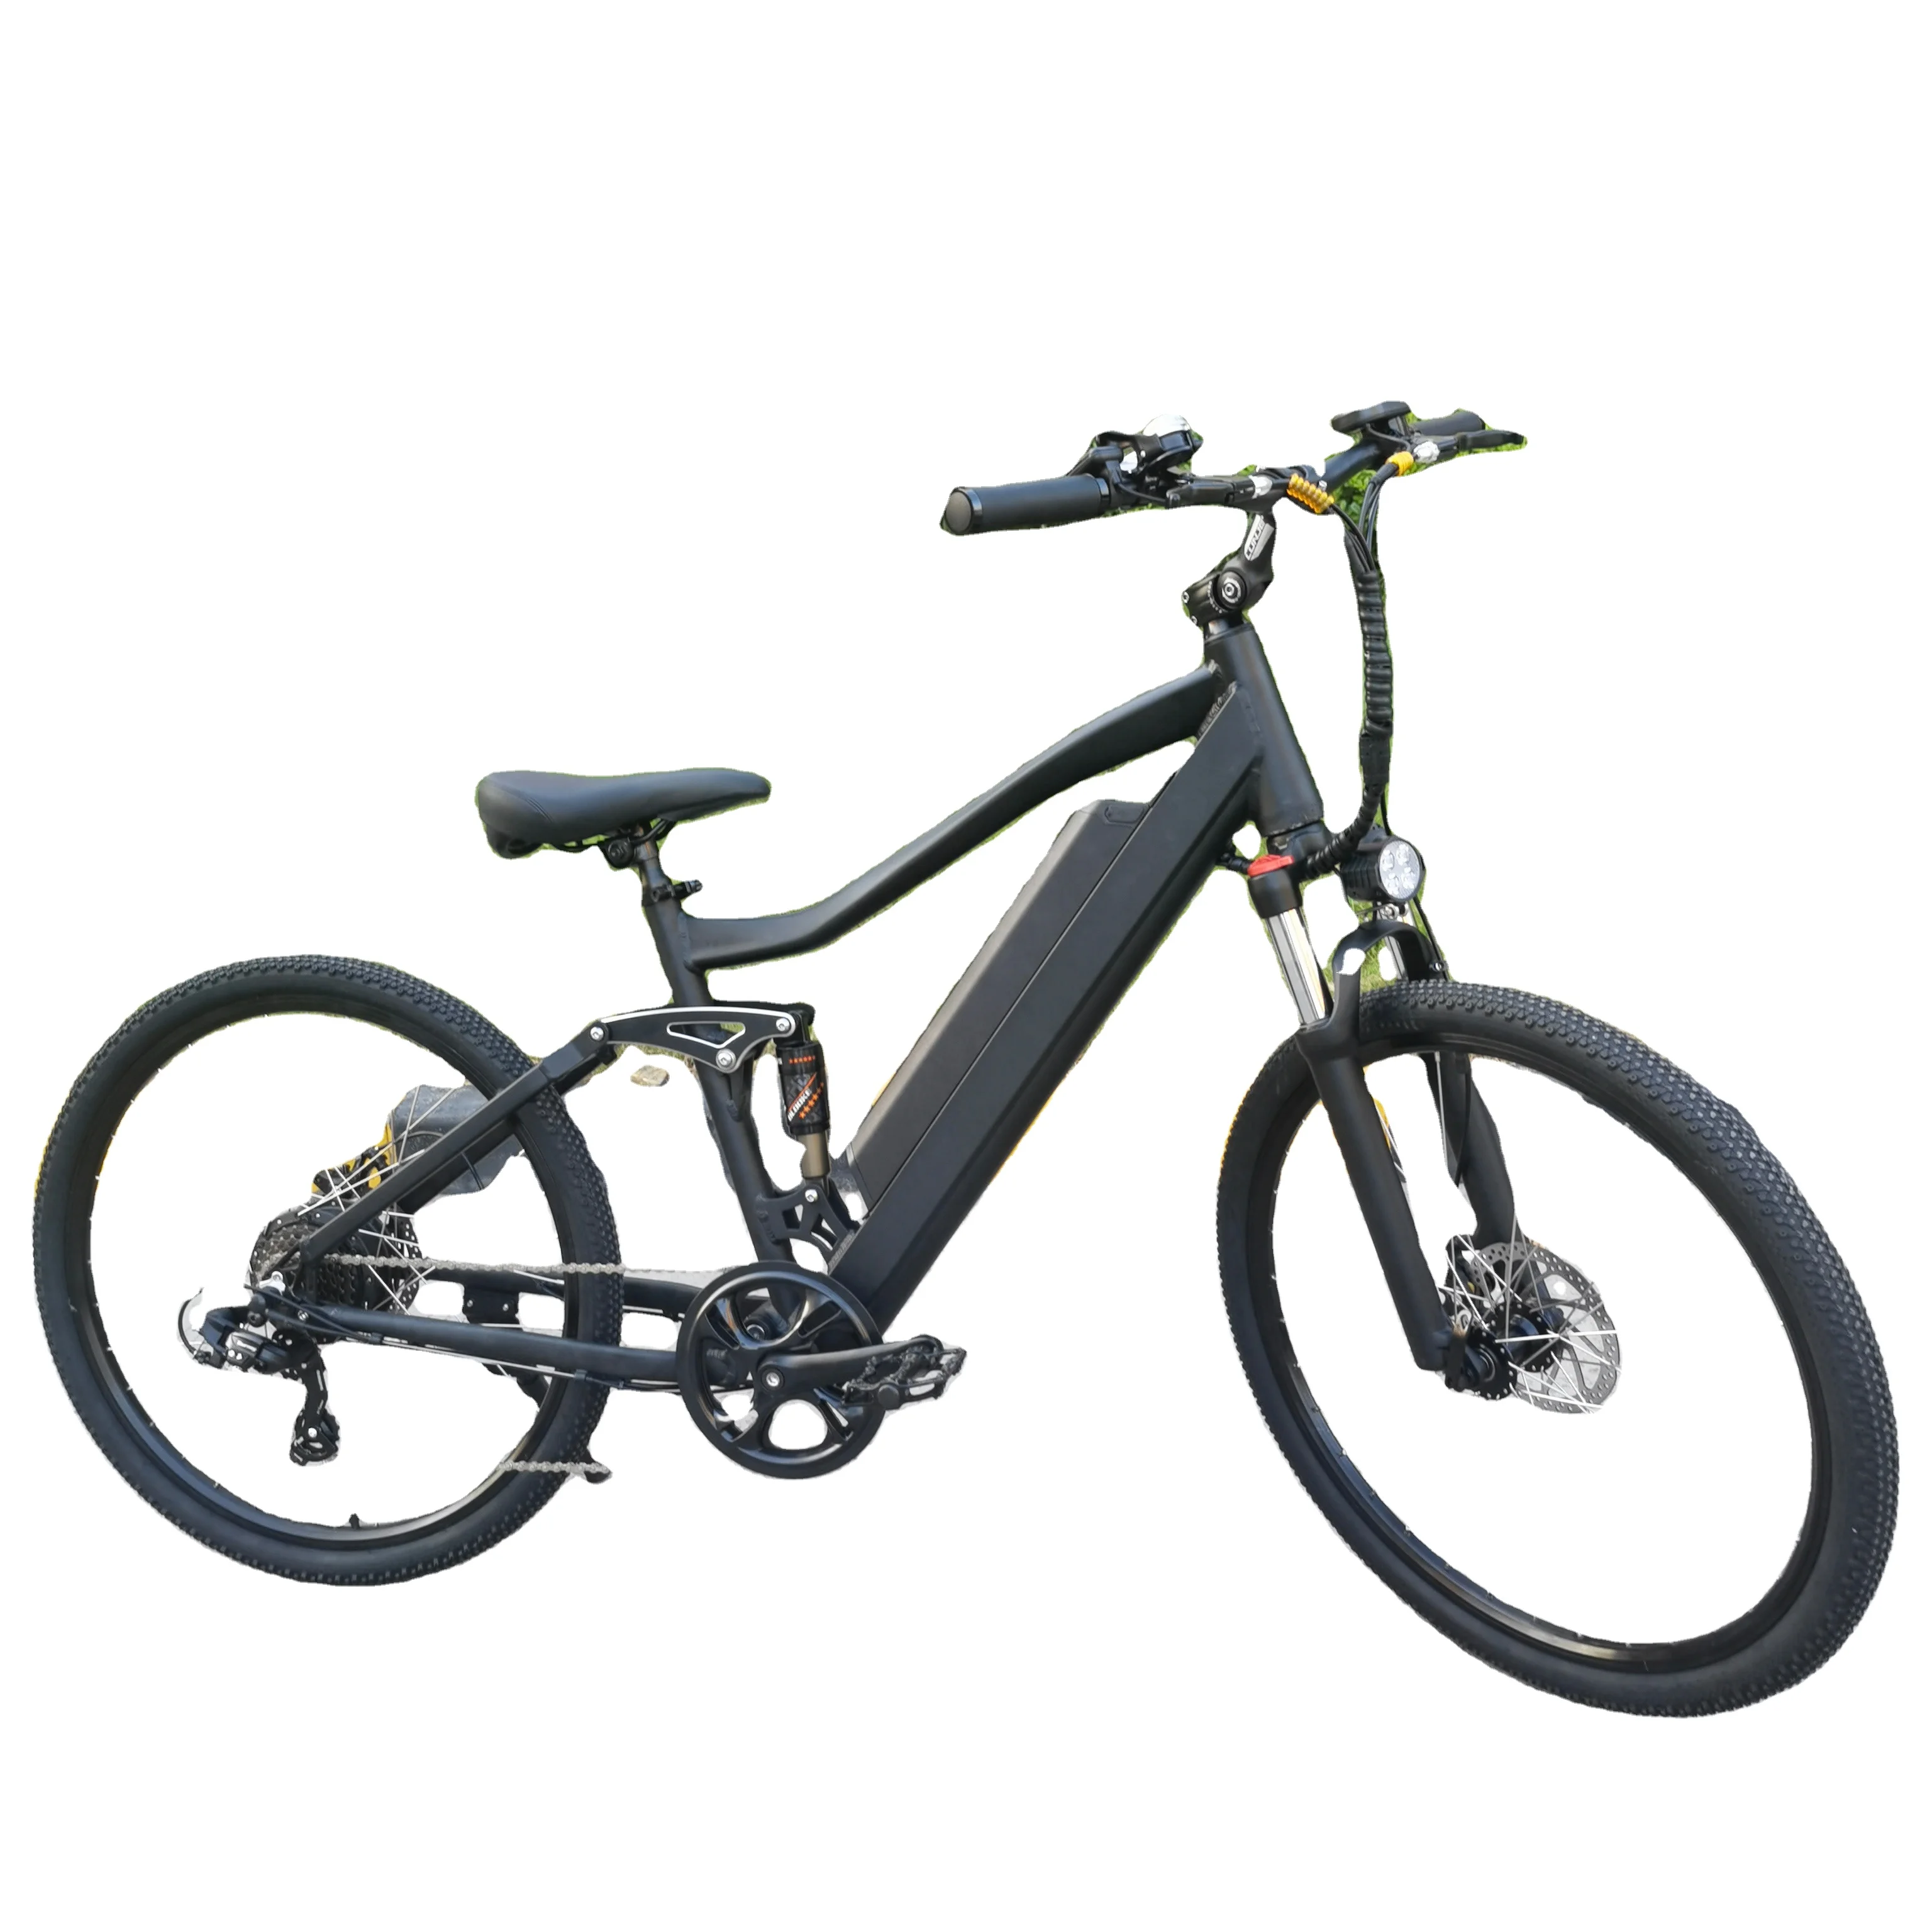 

Hot Sale 750w 48v electric Mountain Adult Bikes 6 speed Aluminum Alloy 27.5 Inch bikes bikes for adults, Black